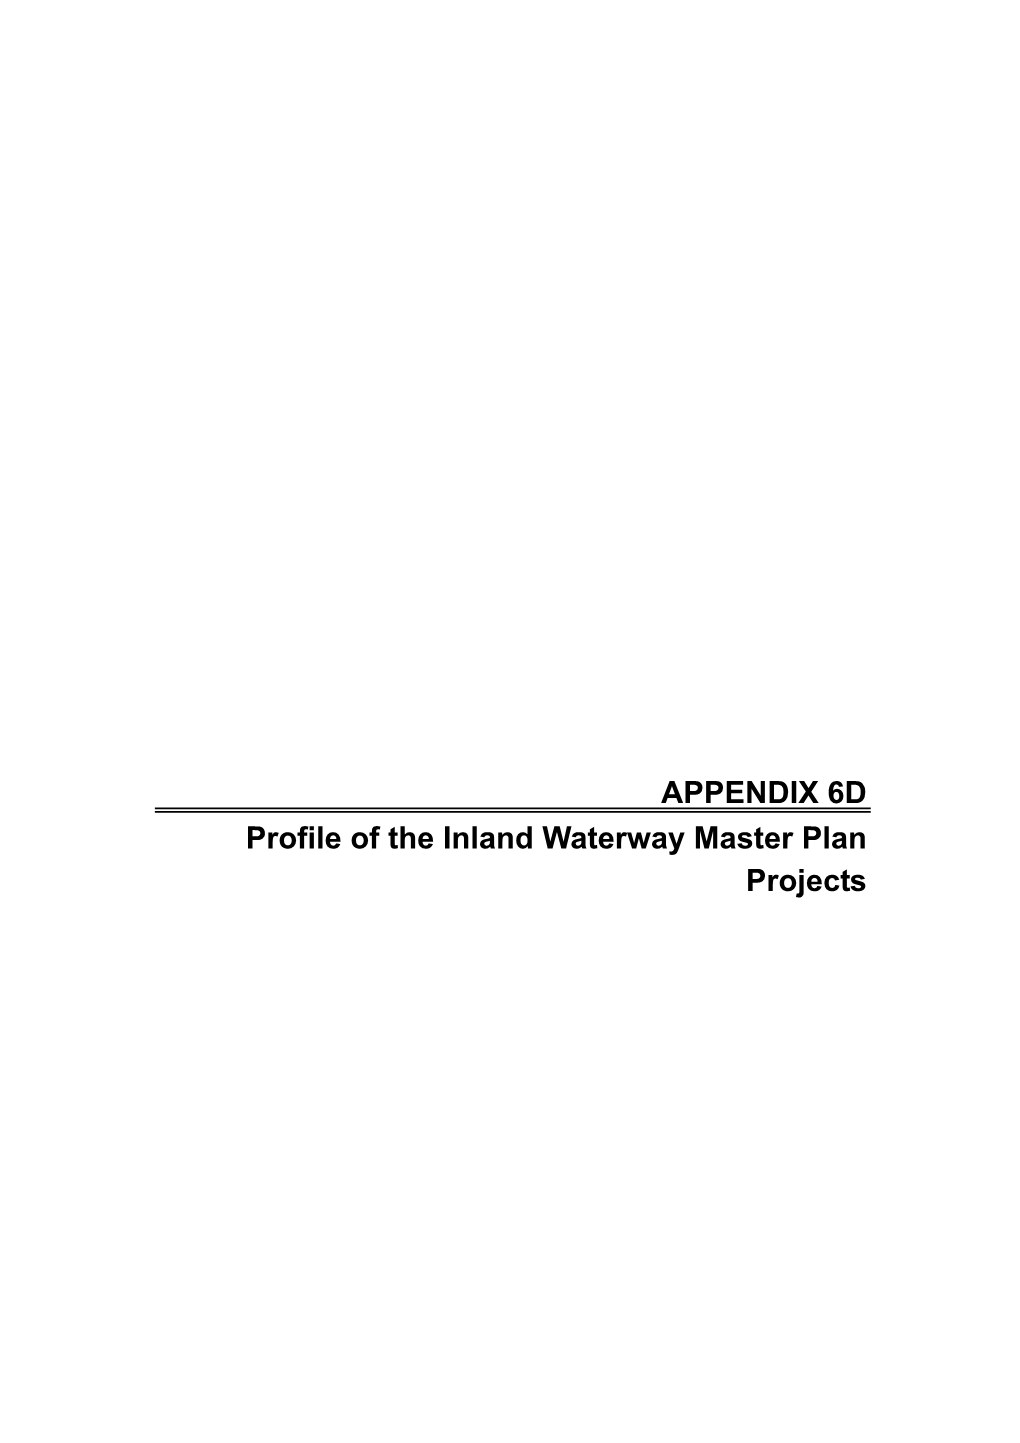 APPENDIX 6D Profile of the Inland Waterway Master Plan Projects